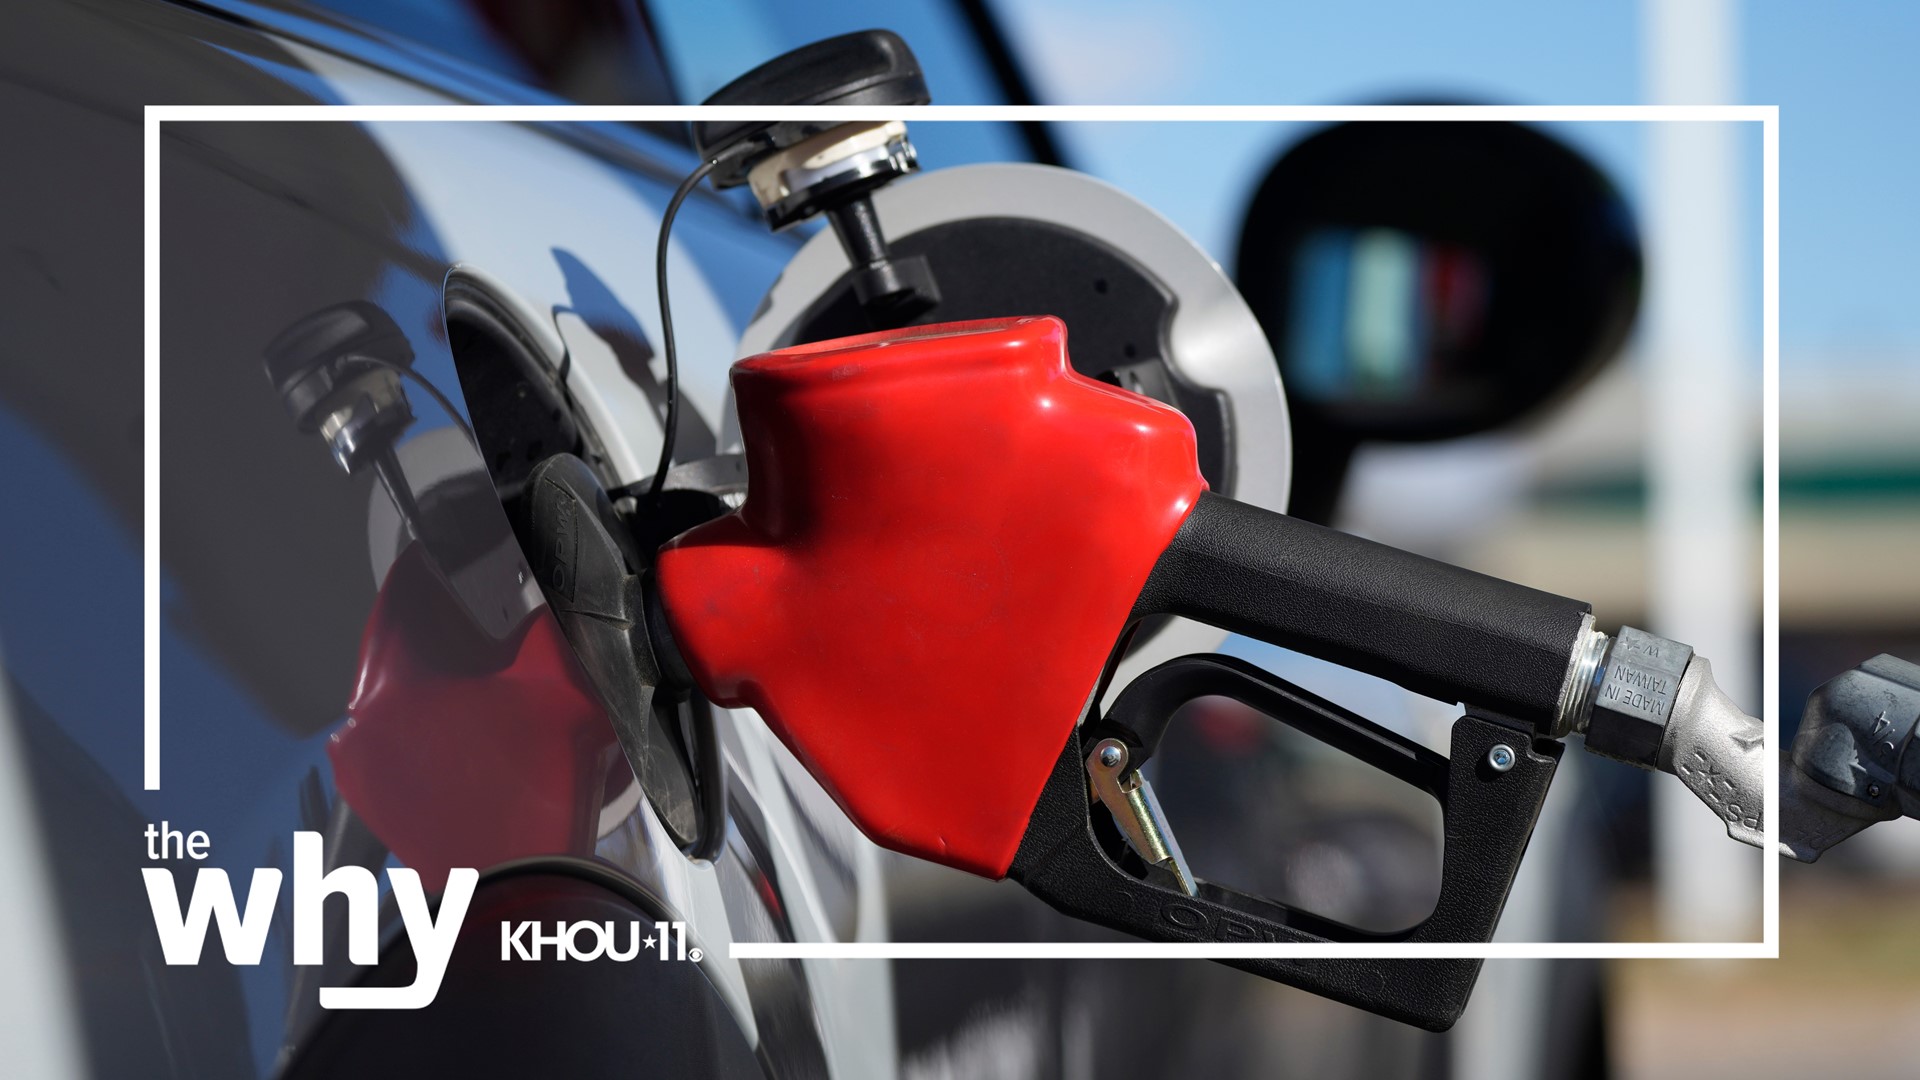 Fuel prices are down, and they could continue to fall in the months ahead.